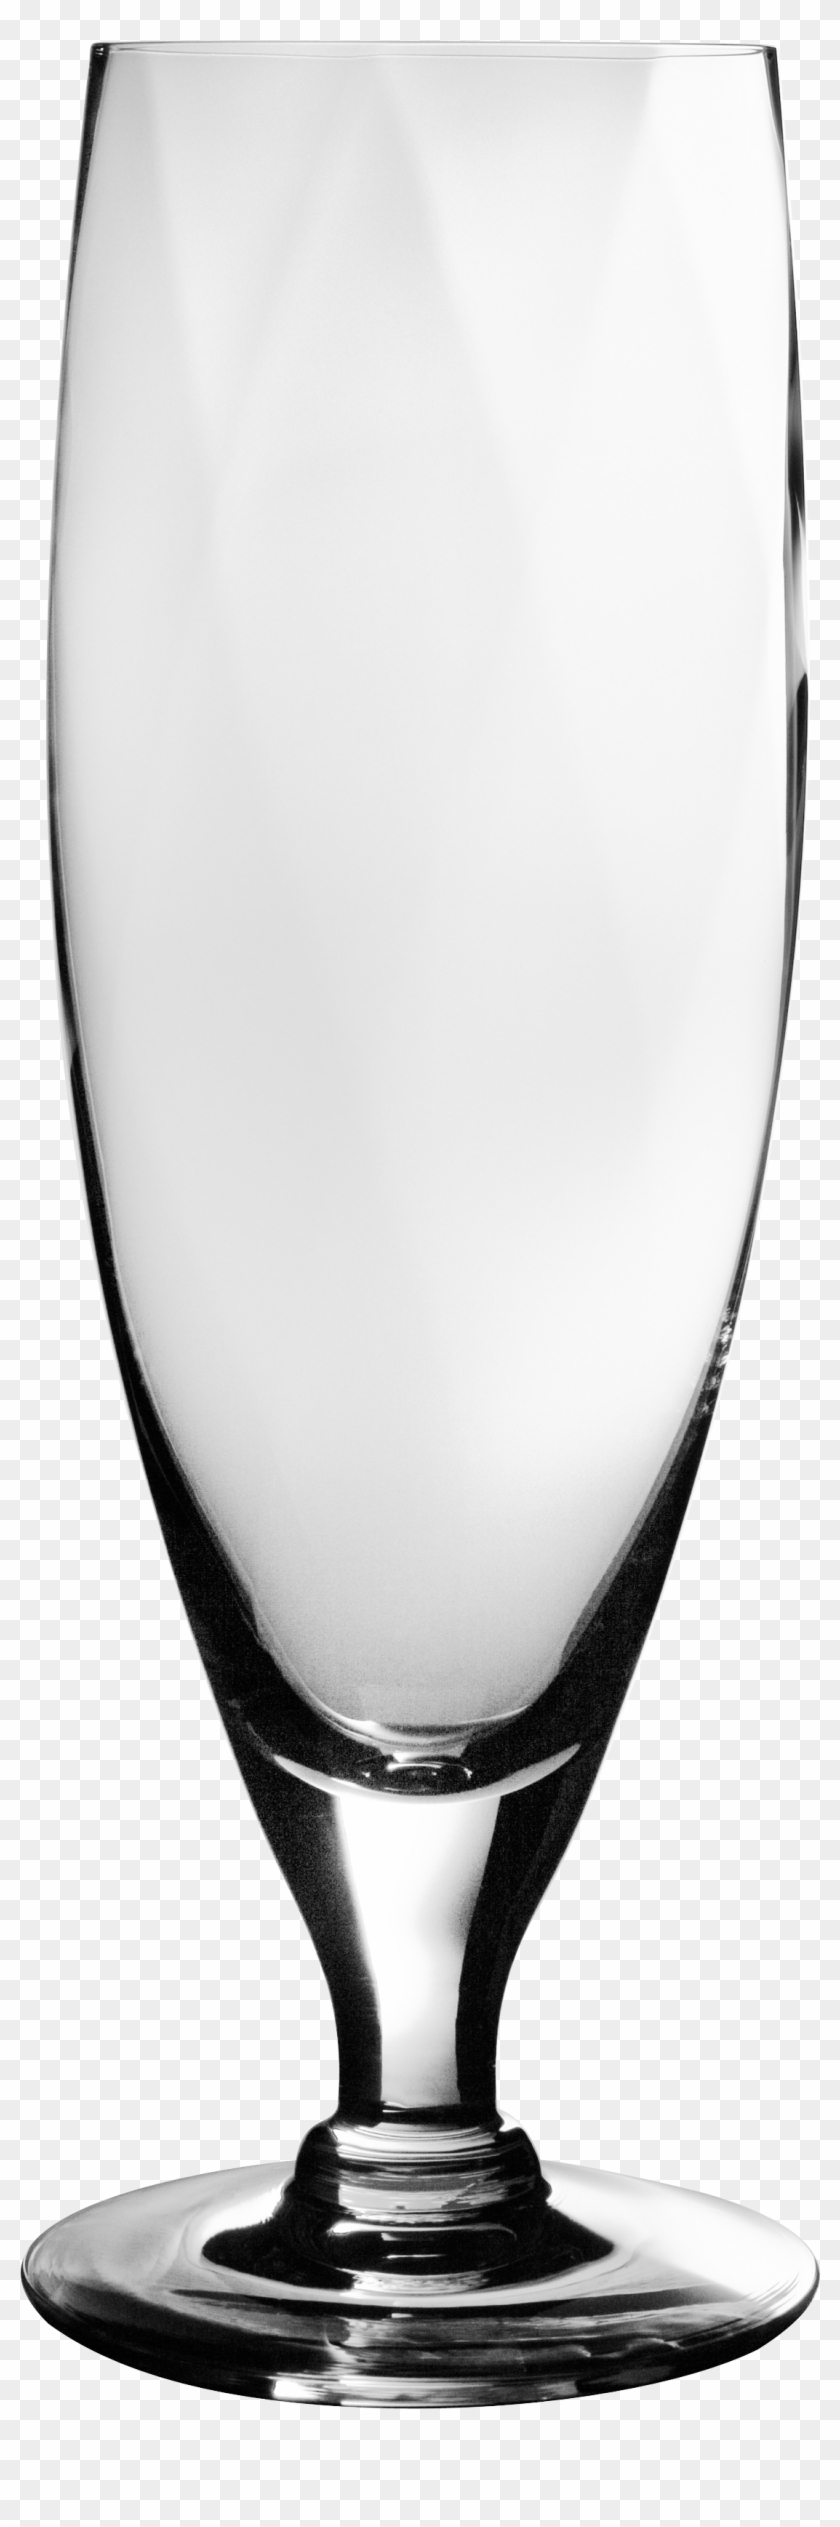 Empty Wine Glass Png Image - Glass Clipart